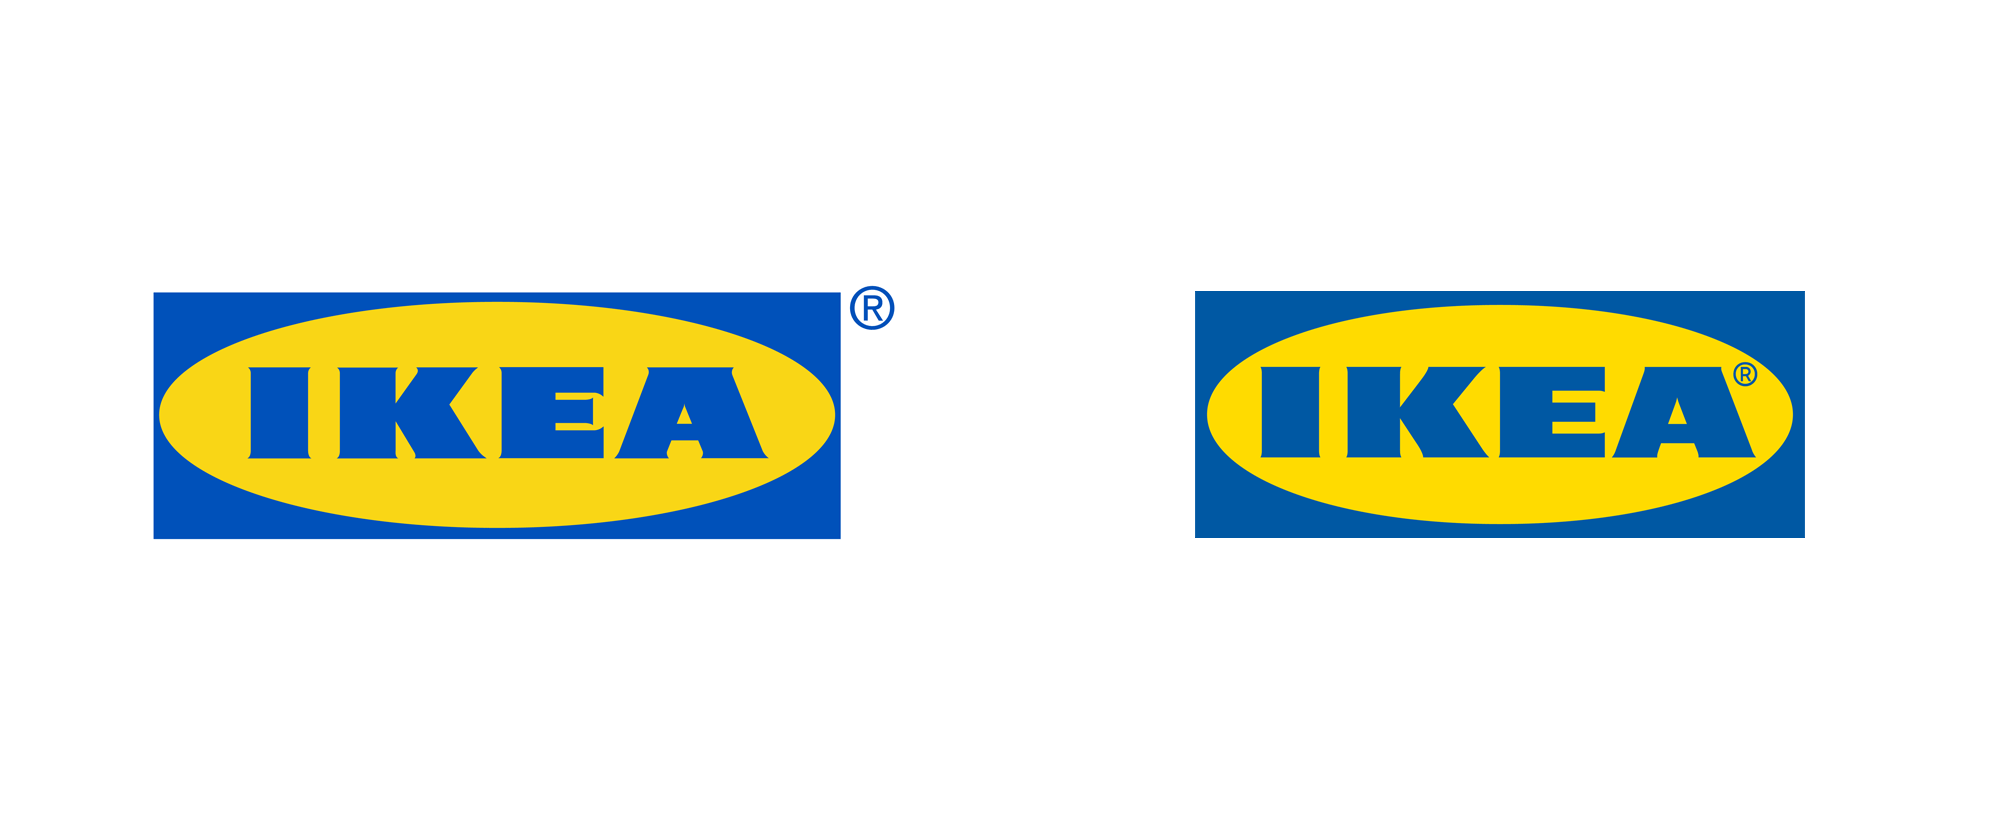 Brand New New Logo For Ikea By Seventy Agency And 72andsunny